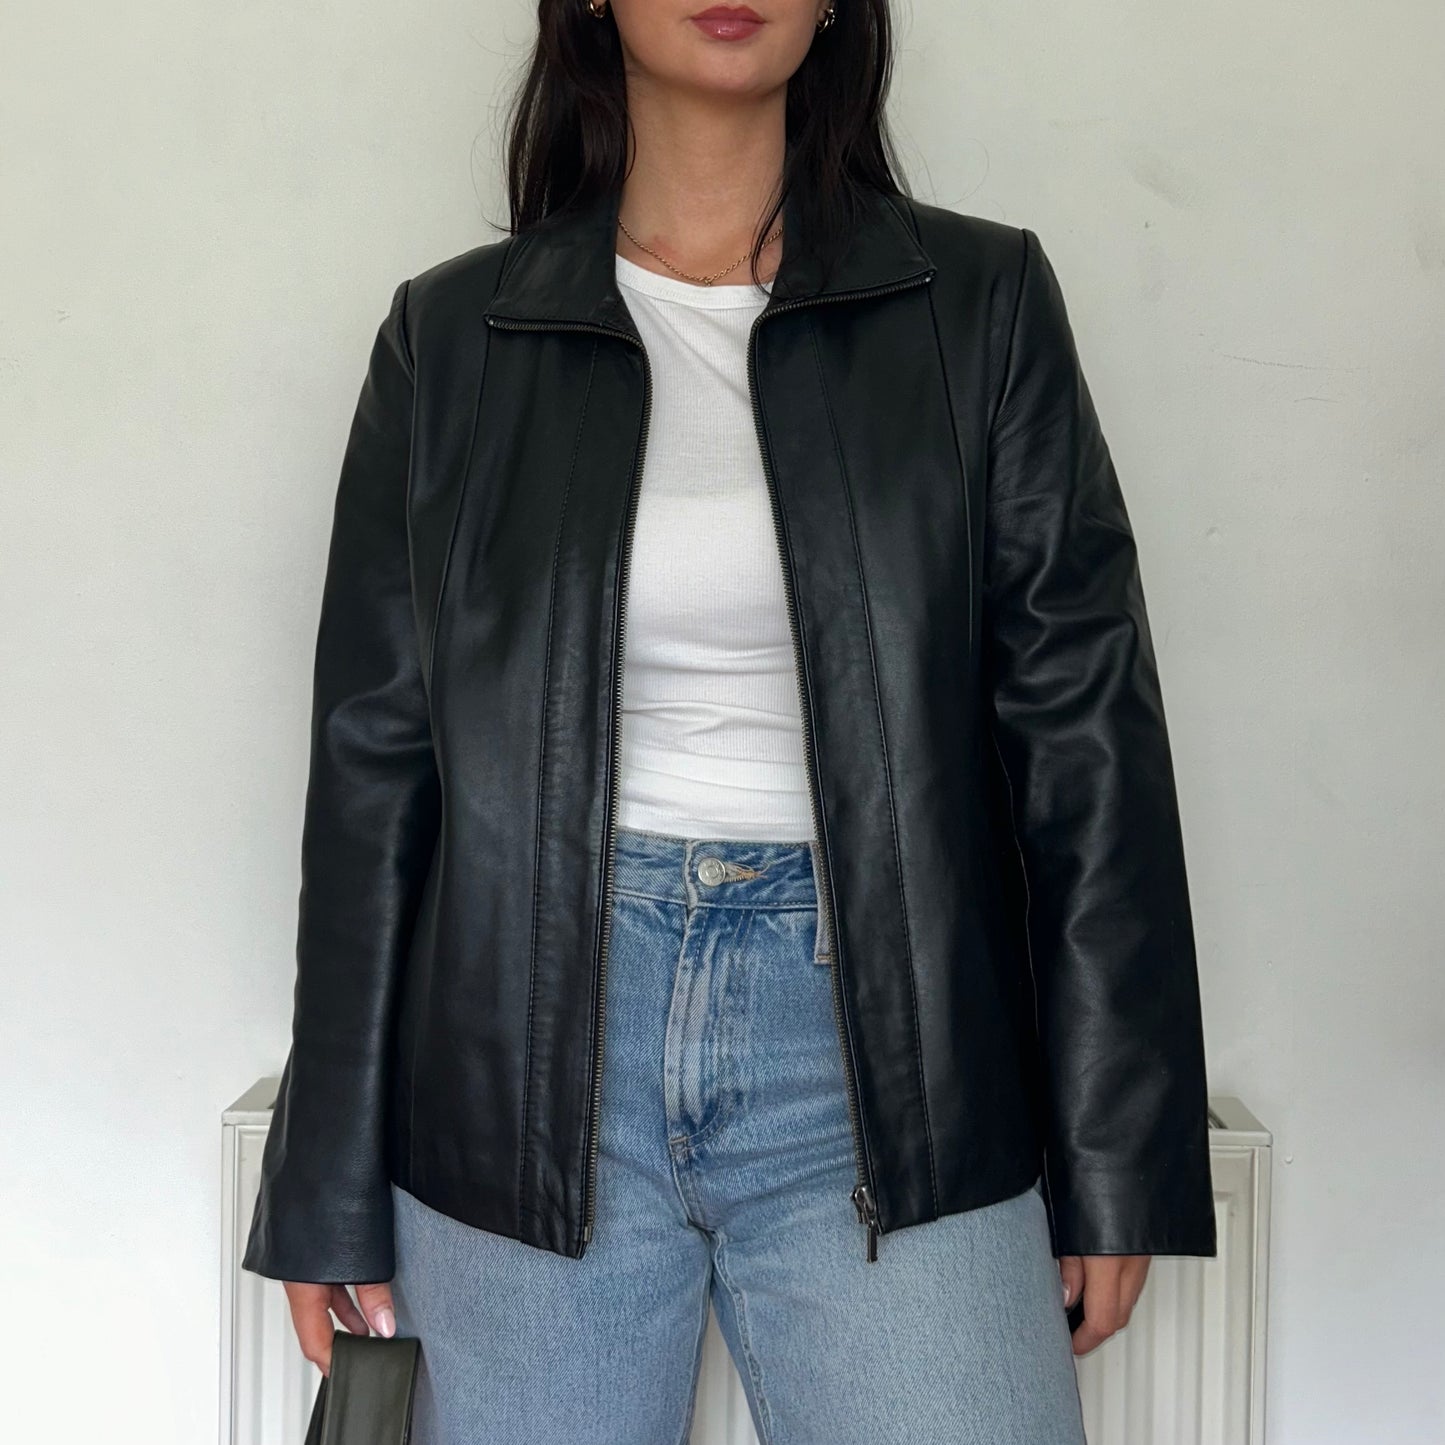 close up of black leather bomber jacket shown on a model wearing a white top and blue jeans